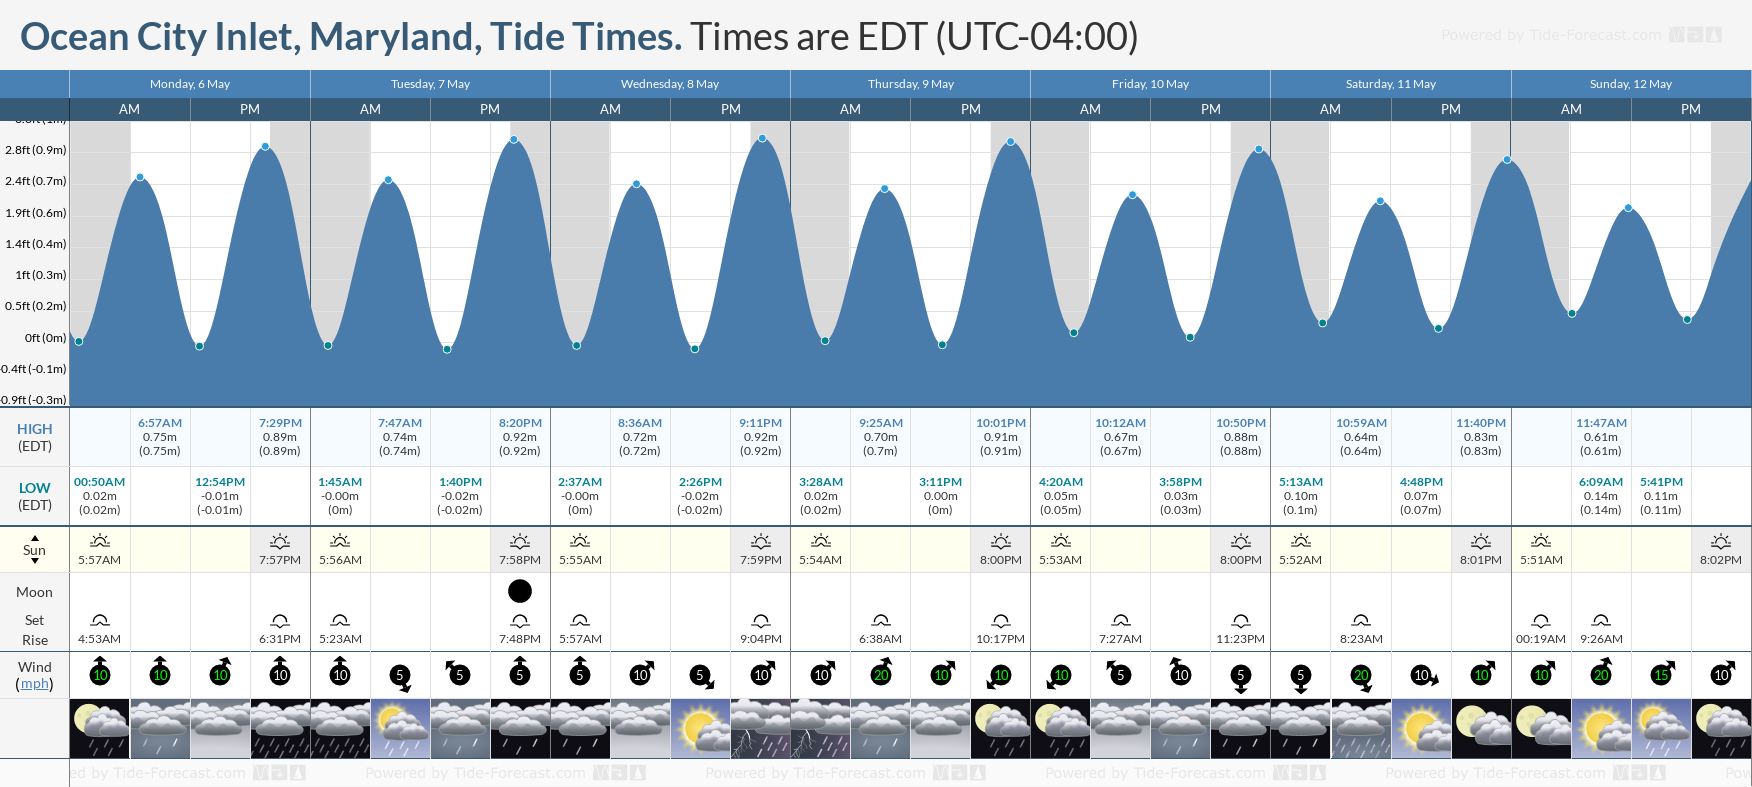 Ocean City Inlet, Maryland Tide Chart including high and low tide tide times for the next 7 days